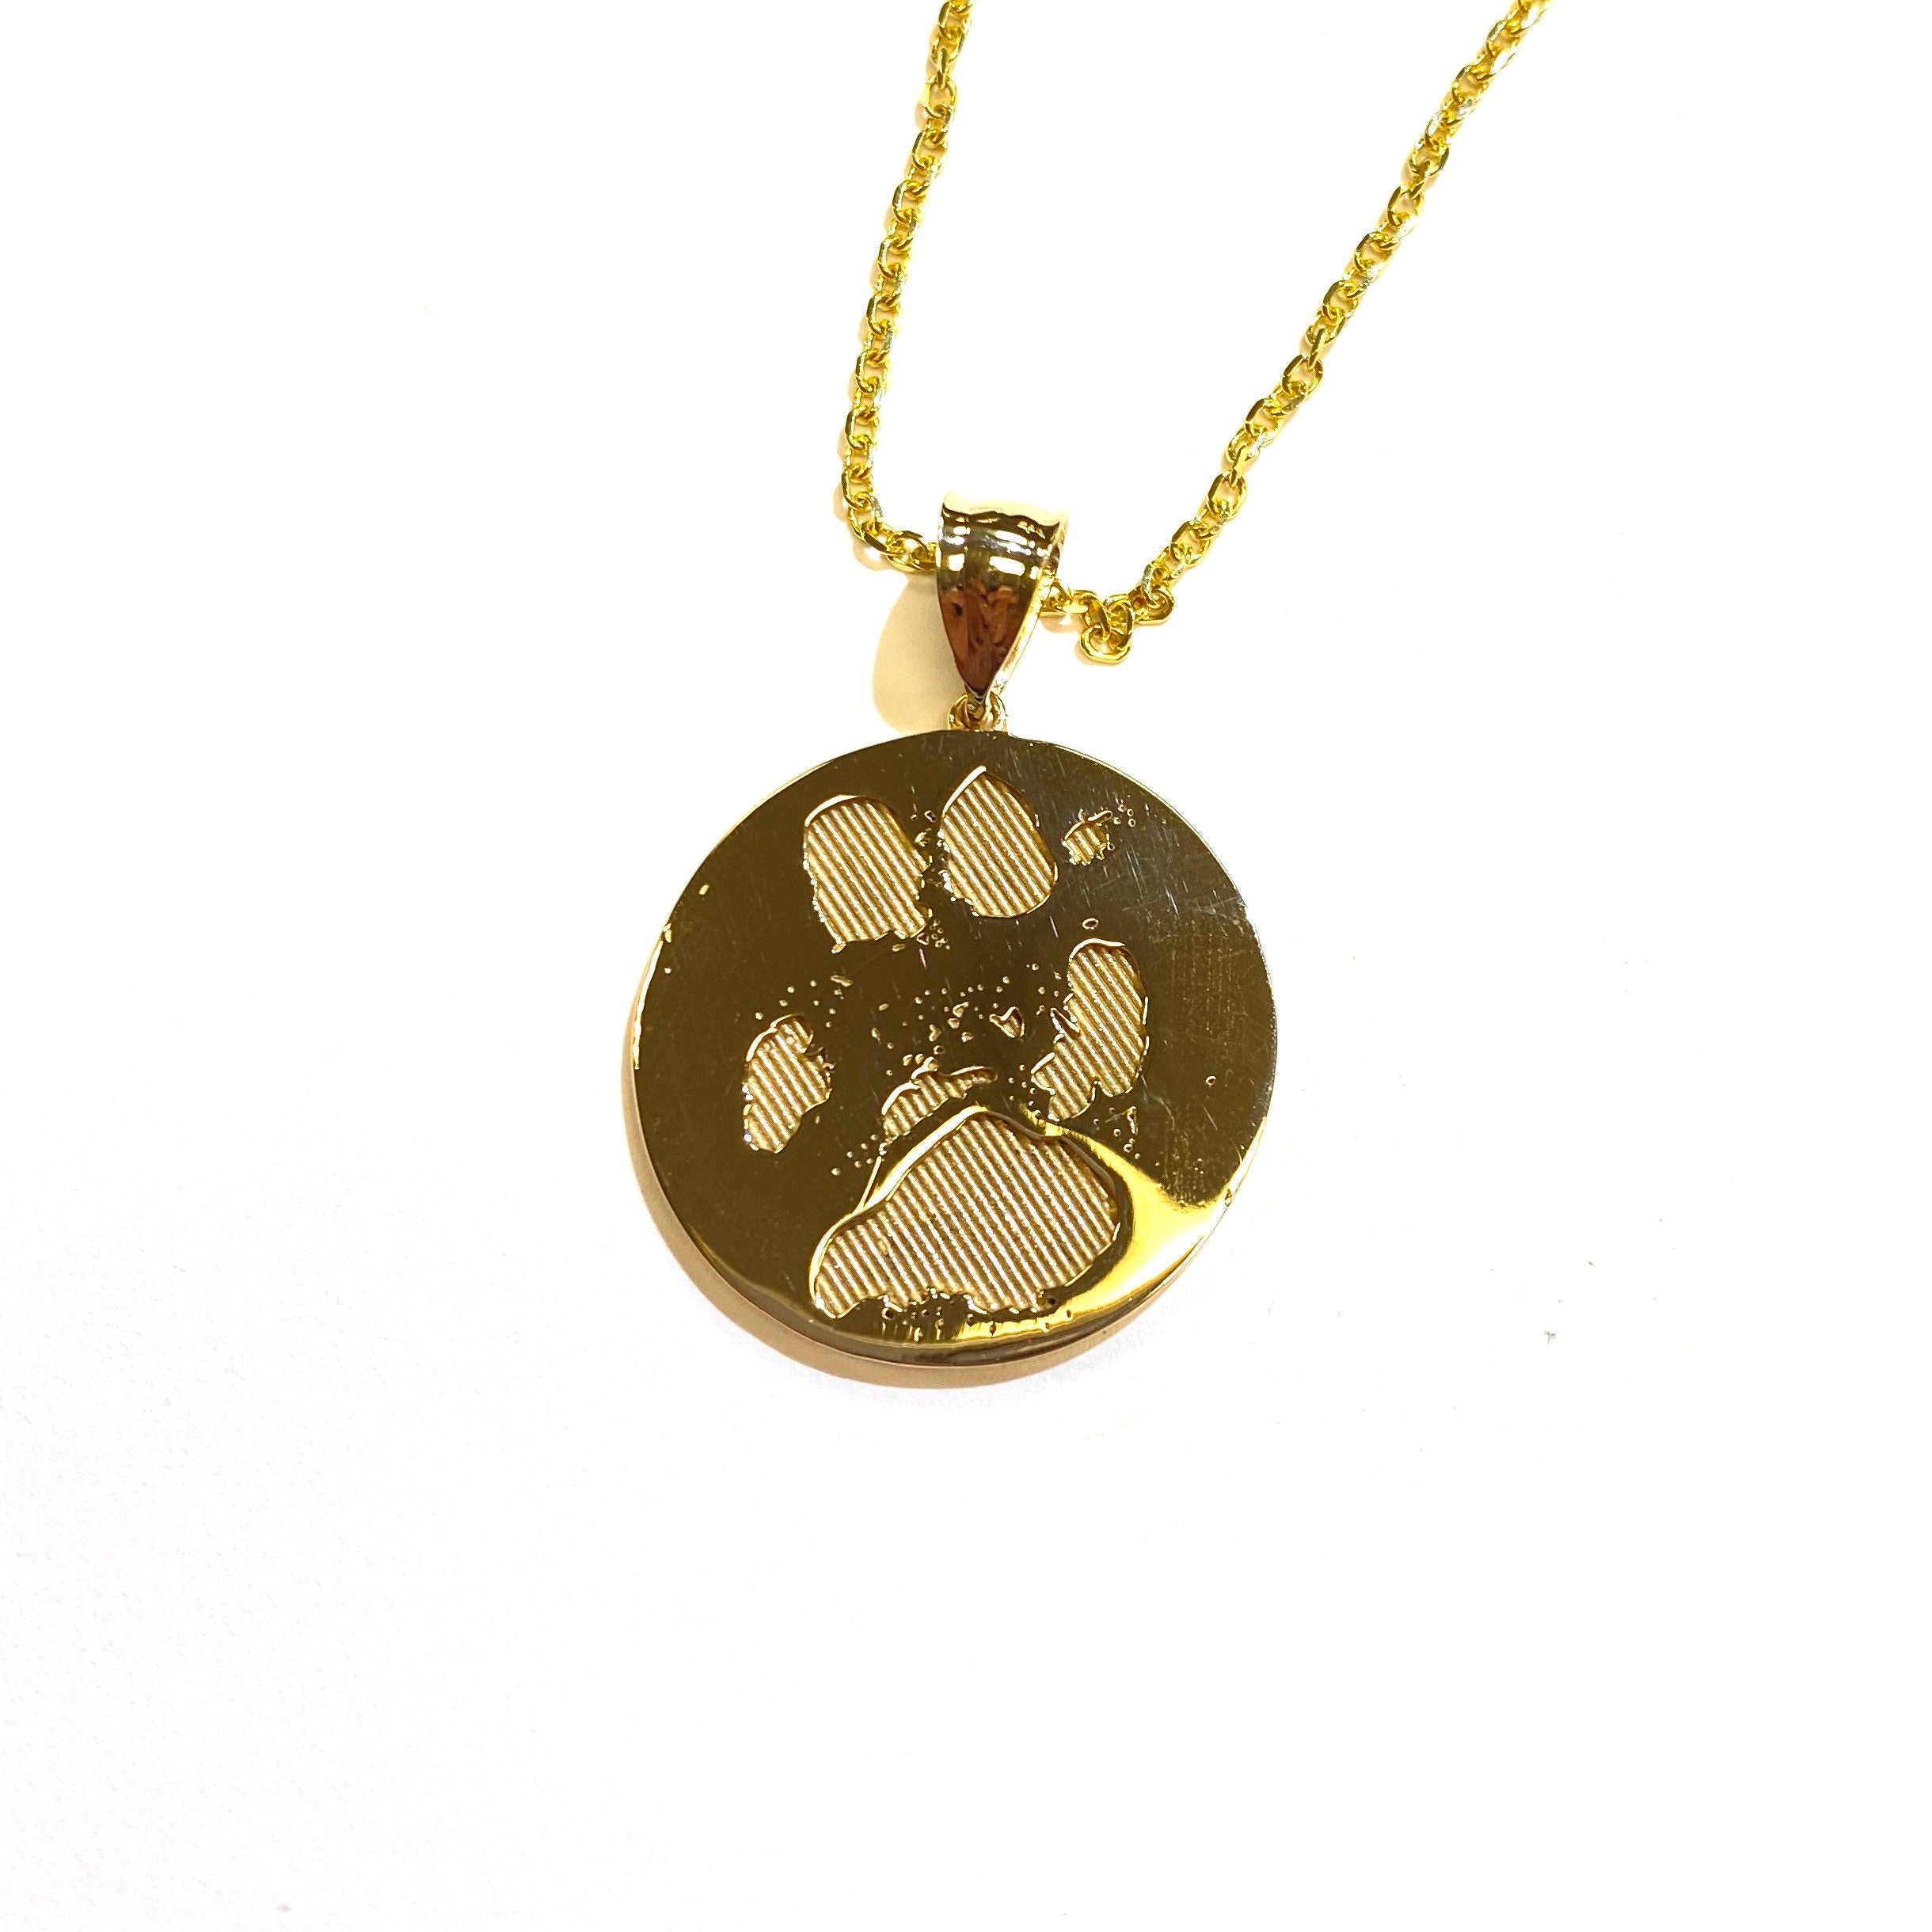 Sterling Silver Paw Print Necklace 001-640-03437 | Harris Jeweler | Troy, OH